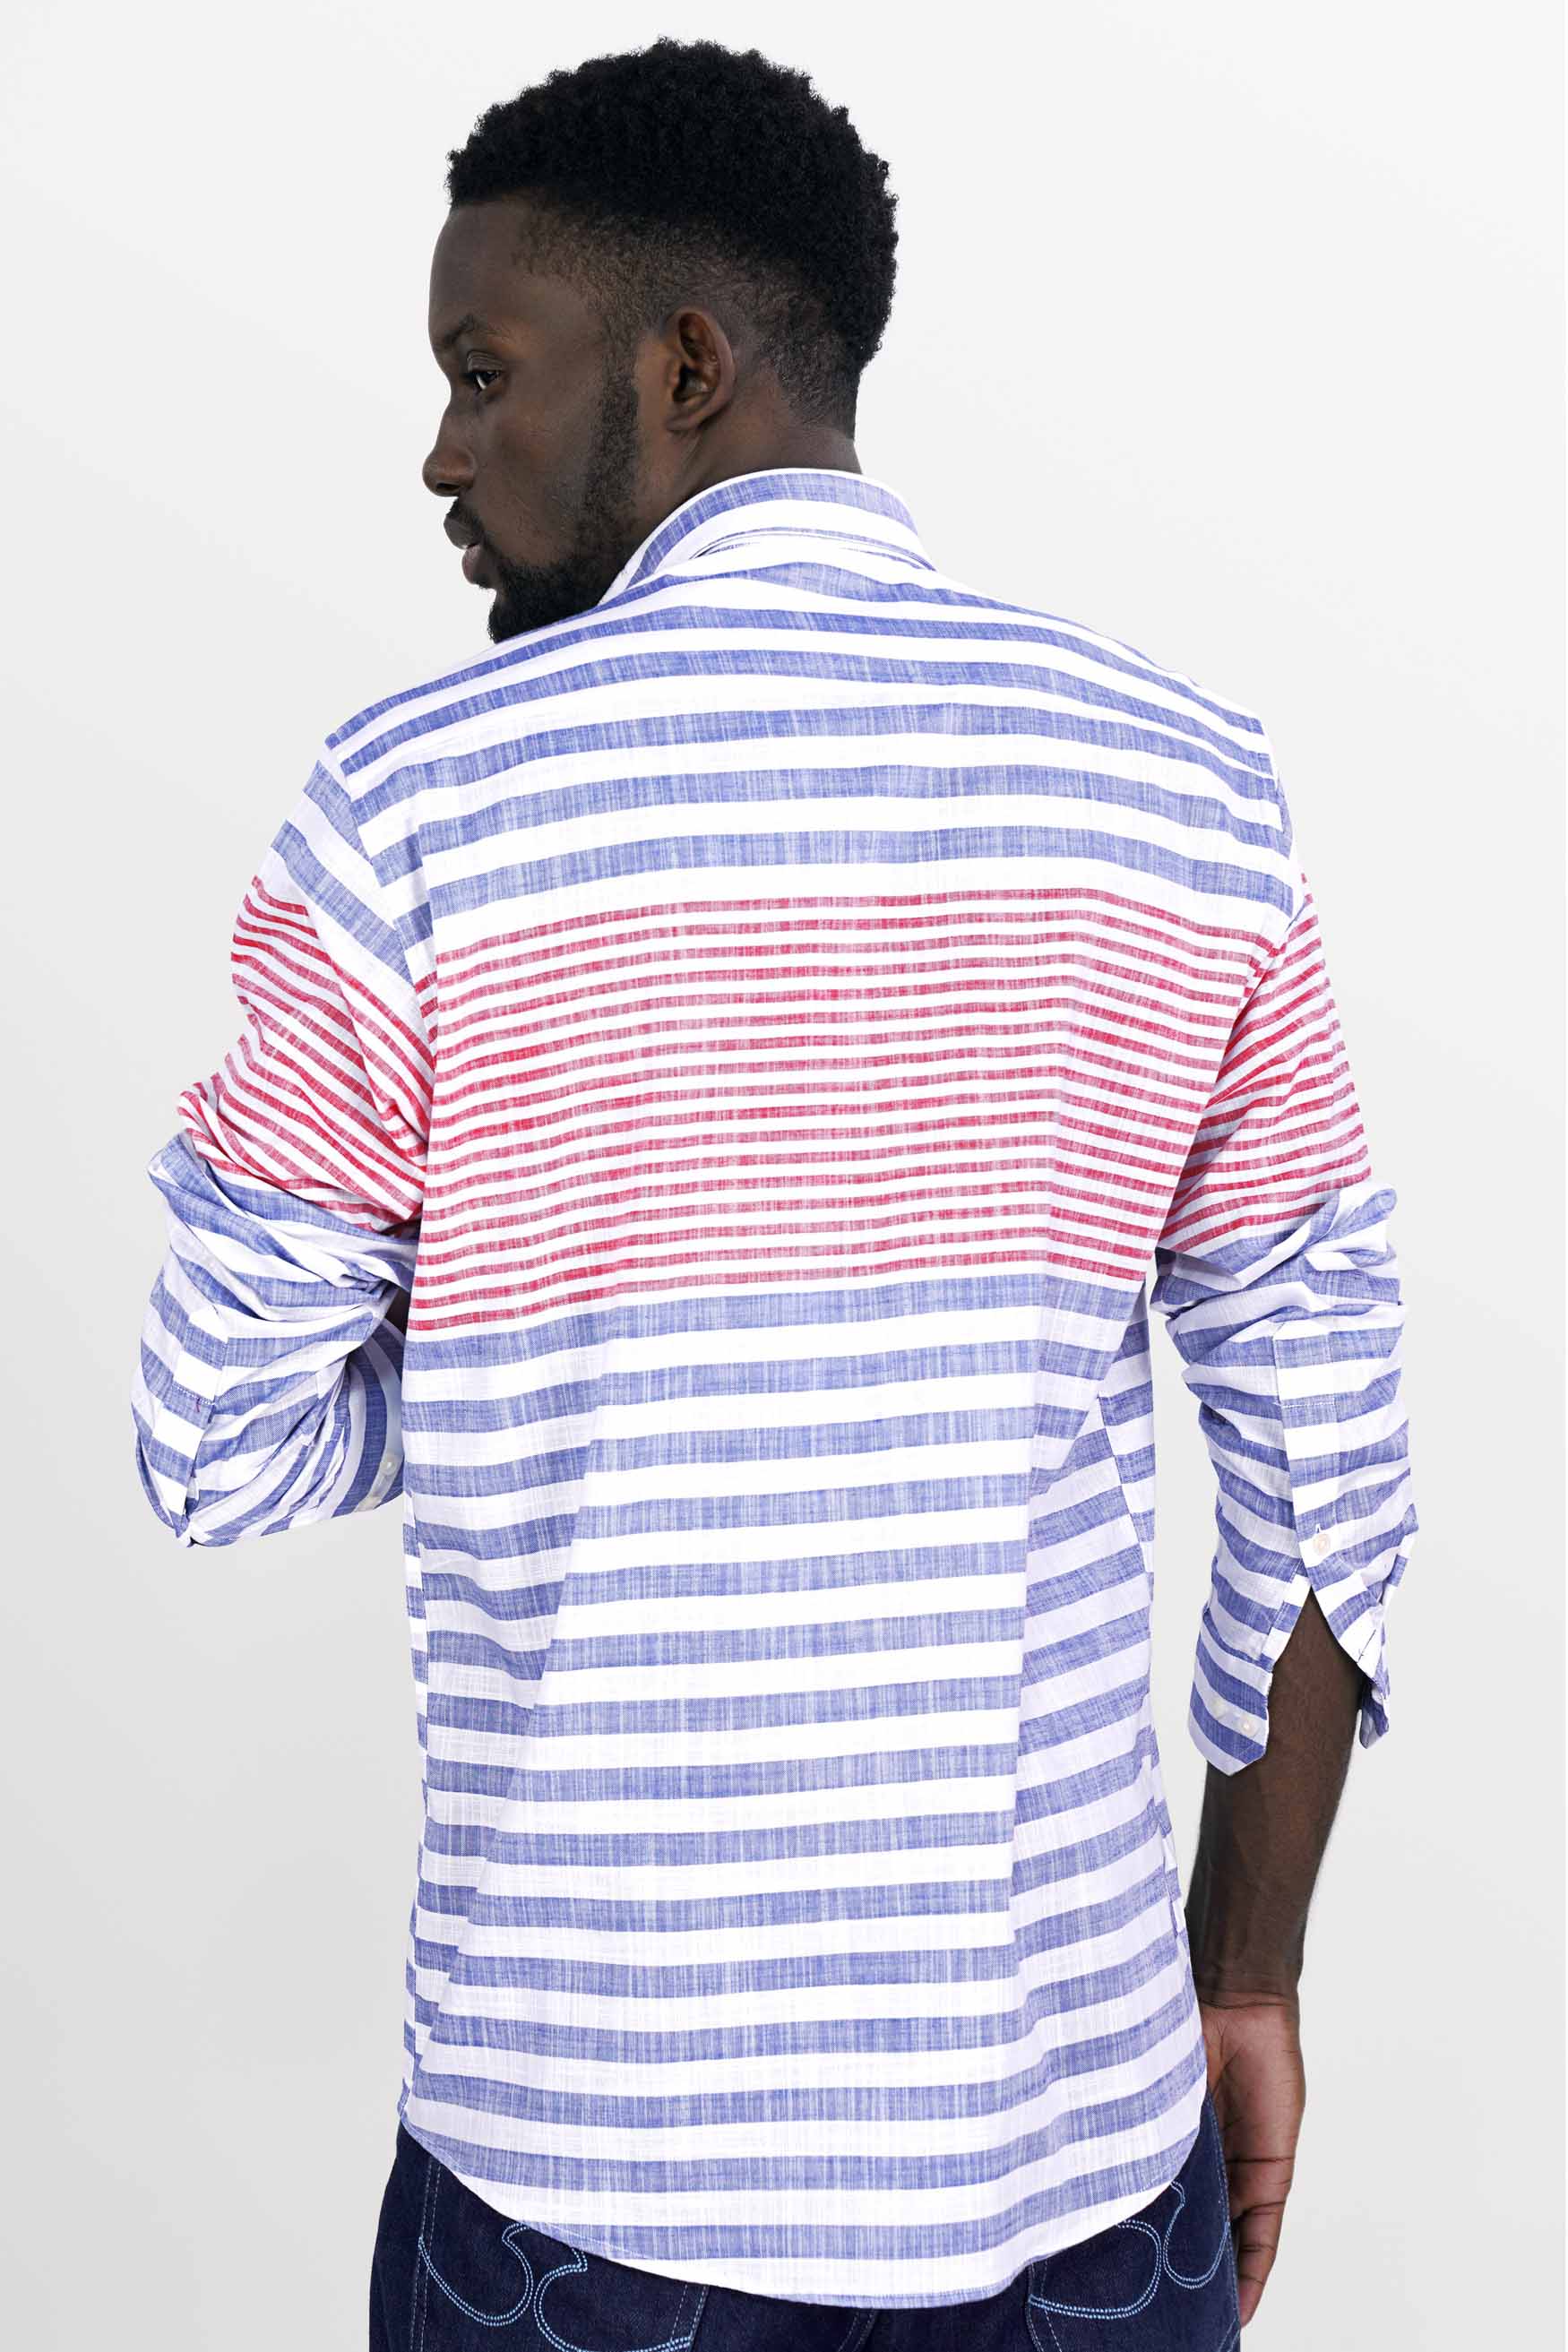 Lynch Blue with Reddish and Bright White Striped Funky Patchwork Luxurious Linen Designer Shirt 6165-BD-E178-38, 6165-BD-E178-H-38, 6165-BD-E178-39, 6165-BD-E178-H-39, 6165-BD-E178-40, 6165-BD-E178-H-40, 6165-BD-E178-42, 6165-BD-E178-H-42, 6165-BD-E178-44, 6165-BD-E178-H-44, 6165-BD-E178-46, 6165-BD-E178-H-46, 6165-BD-E178-48, 6165-BD-E178-H-48, 6165-BD-E178-50, 6165-BD-E178-H-50, 6165-BD-E178-52, 6165-BD-E178-H-52